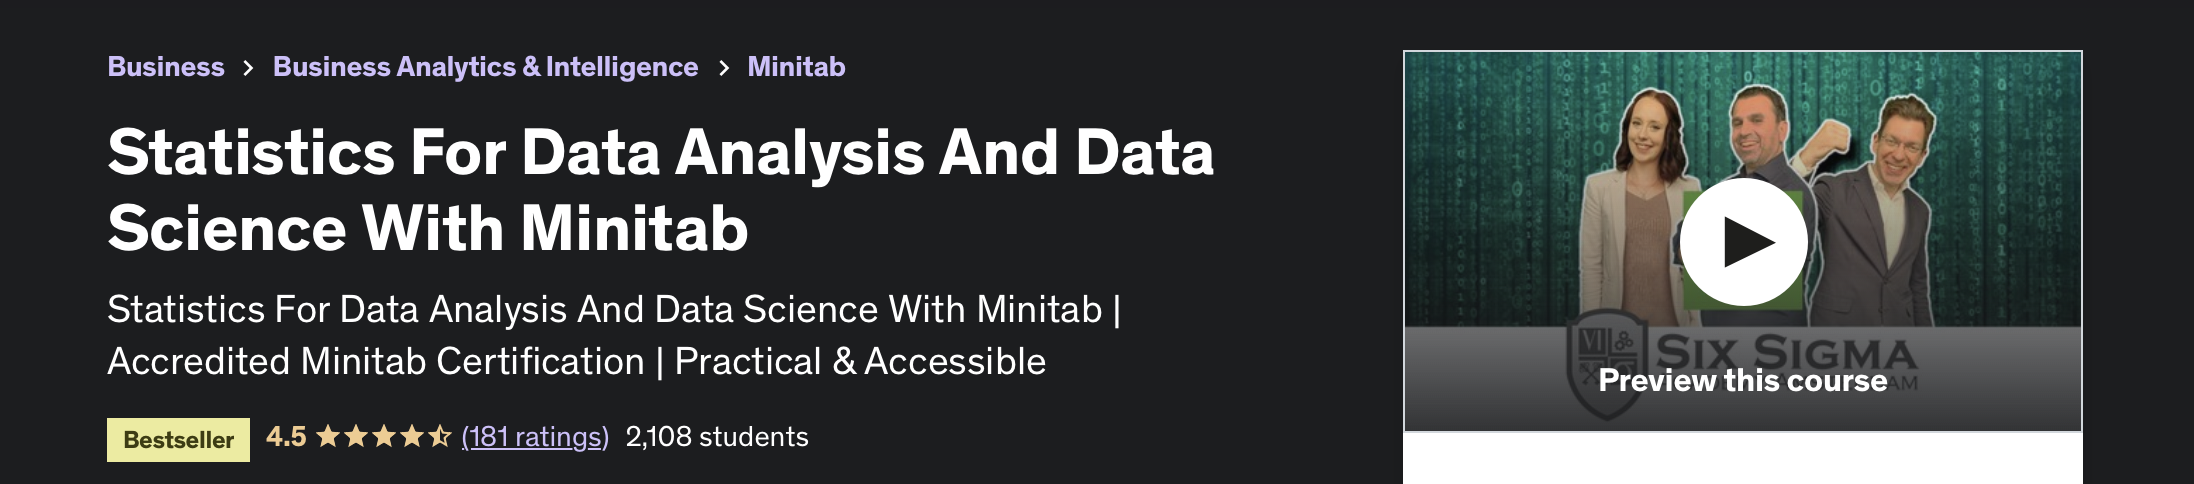 Statistics for Data Analysis and Data Science with Minitab